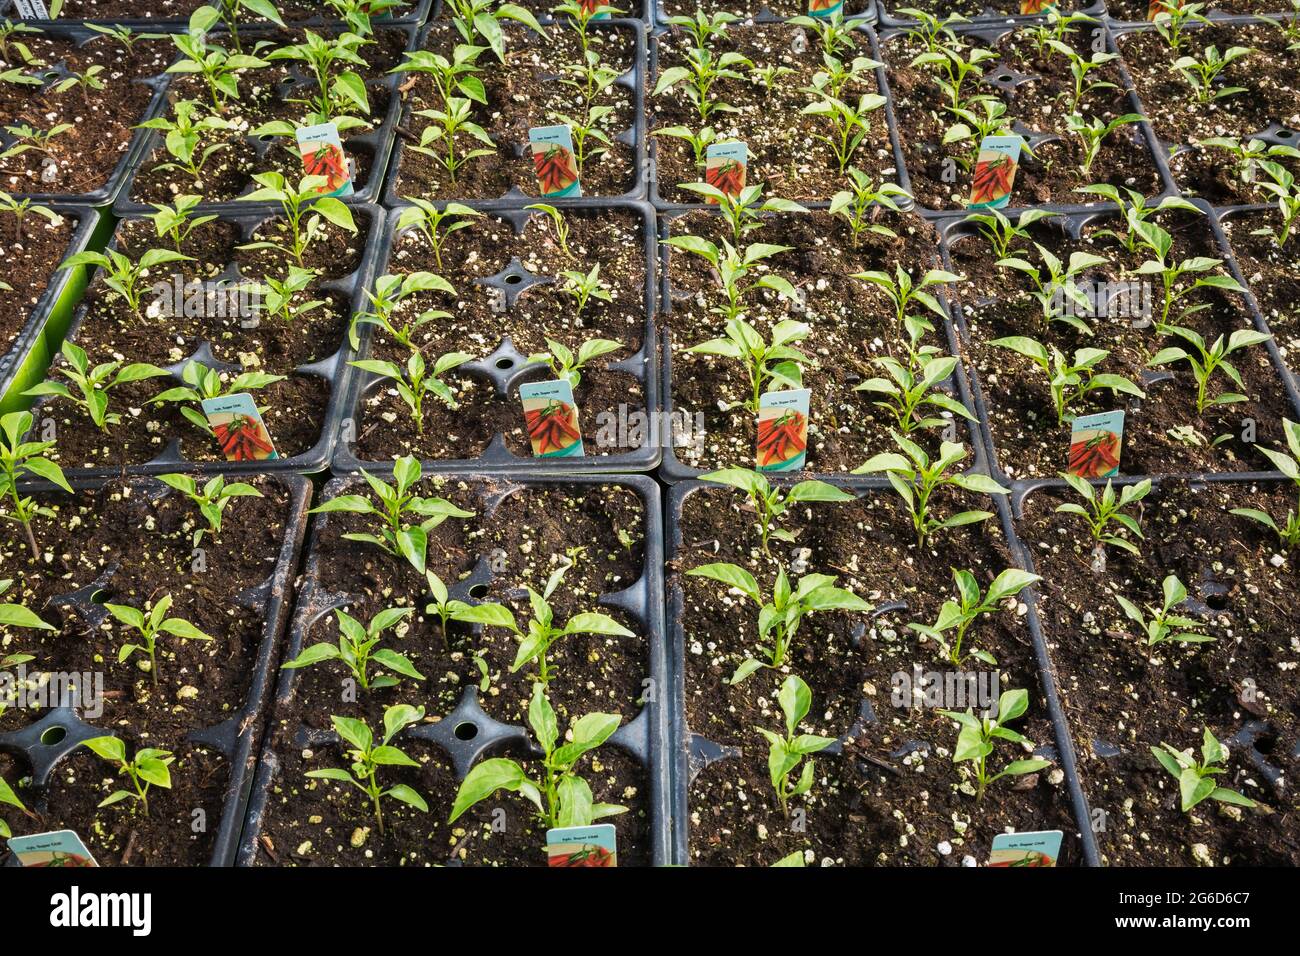 Capsicum Annuum. Super Chilli hybrid Pepper plants growing in plastic trays inside a greenhouse Stock Photo